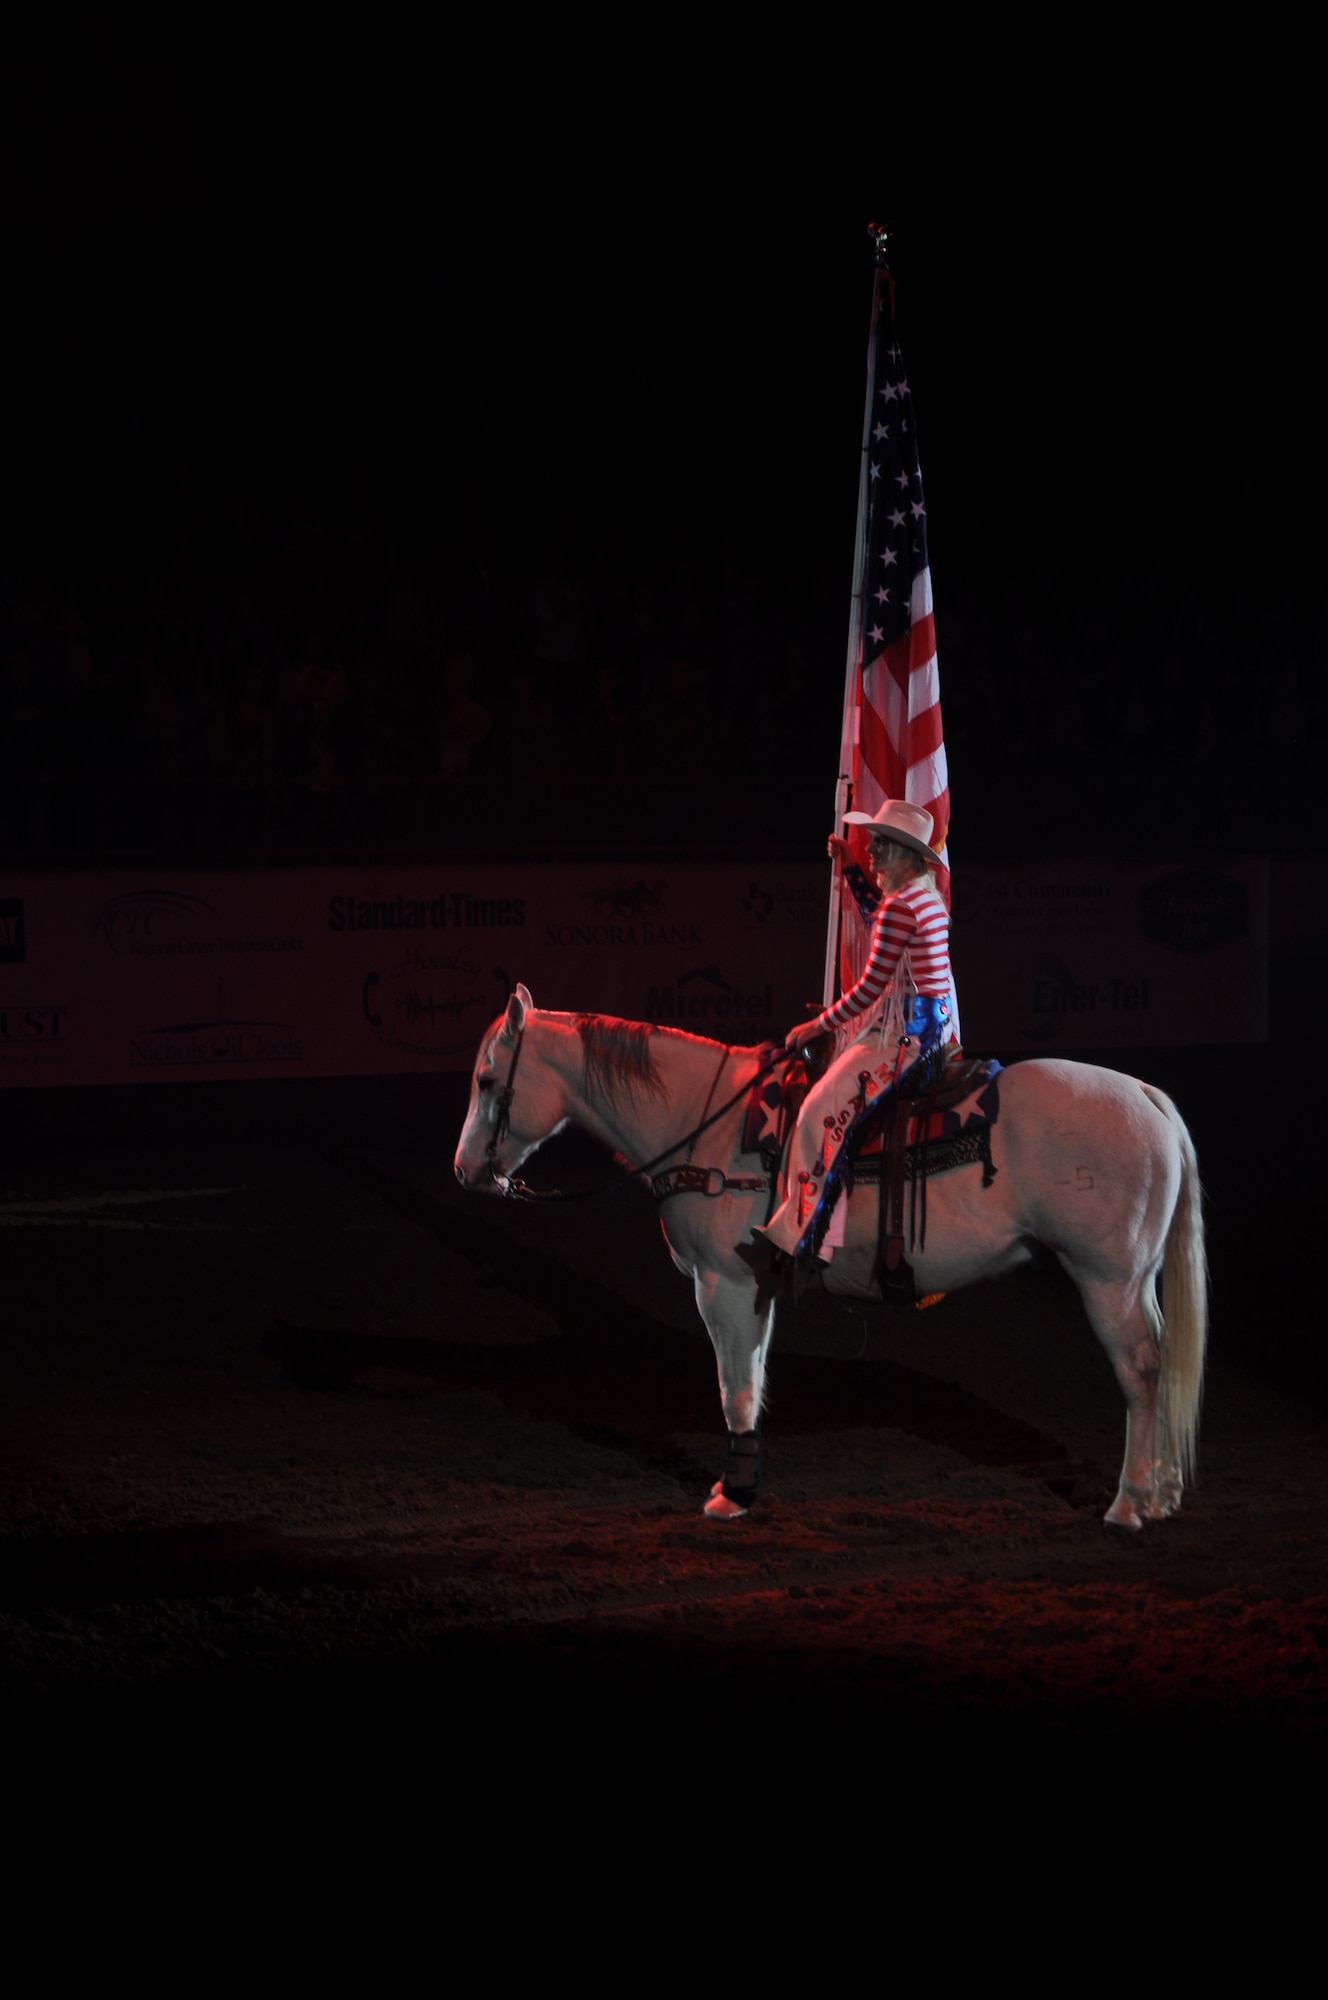 SAN ANGELO, Texas – Marissa Griffin, San Angelo Stock Show and Rodeo Drill Team ambassador, presents the American Flag at the beginning of the San Angelo Stock Show and Rodeo’s Military Appreciation Night at the Foster Communication Coliseum here Feb. 26. Goodfellow Air Force Base’s  Patriotic Blue sang the national anthem during the flag presentation. (U.S. Air Force photo/ Airman 1st Class Breonna Veal)